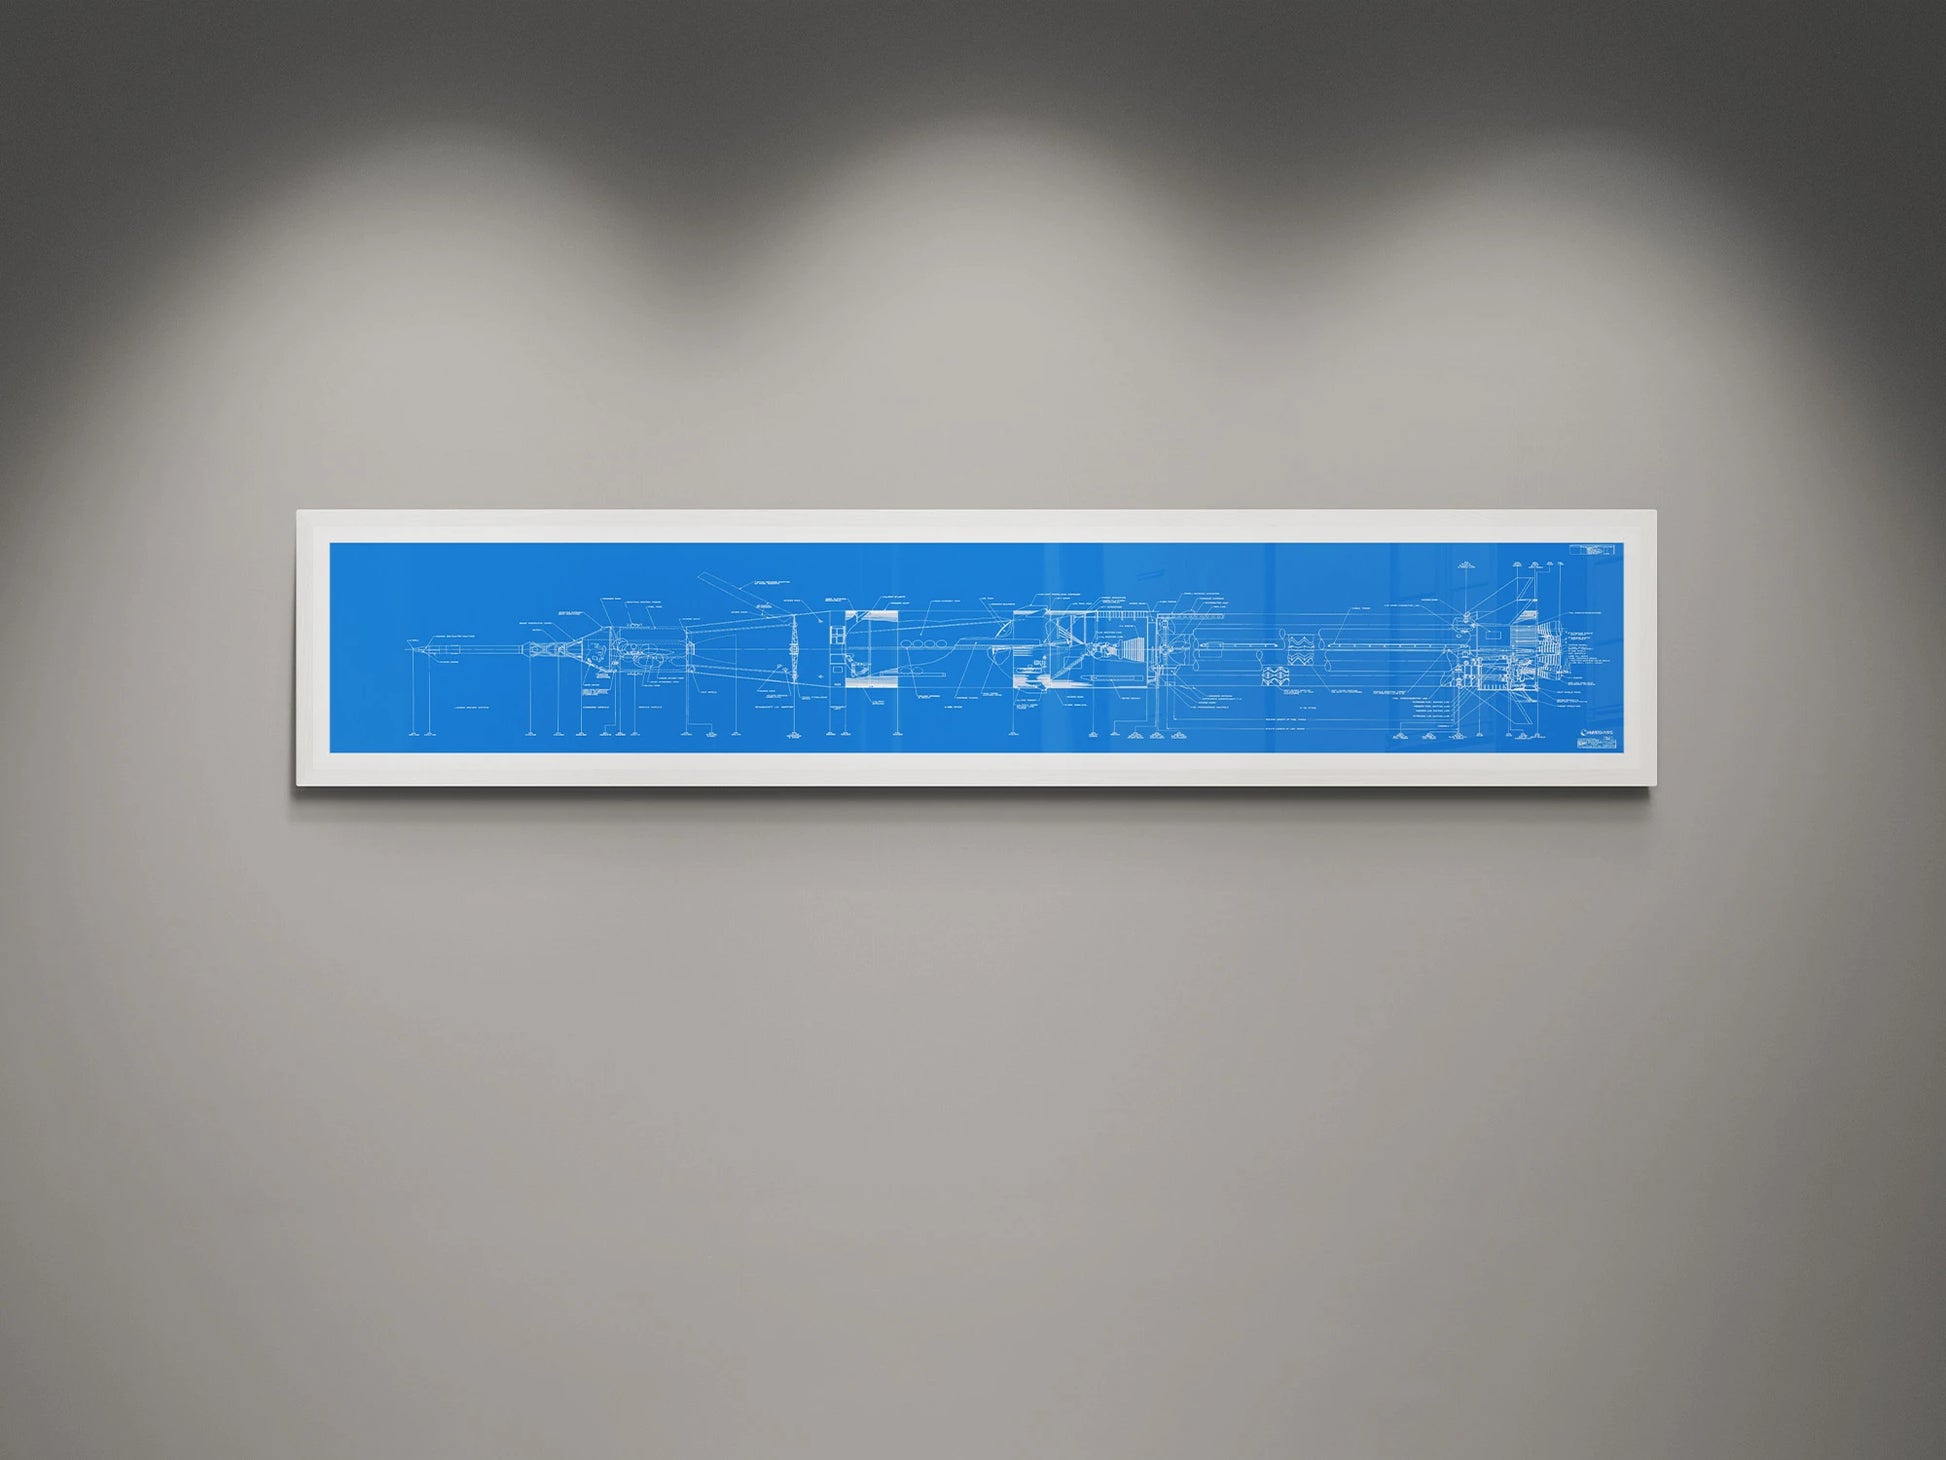 Apollo Saturn 1B Blueprint | NASA posters | Technical blueprint Diagram | A framed blueprint of the NASA Saturn IB rocket, showcasing intricate technical drawings in white on a blue background. The blueprint is mounted on a gray wall and highlighted by soft overhead lights.